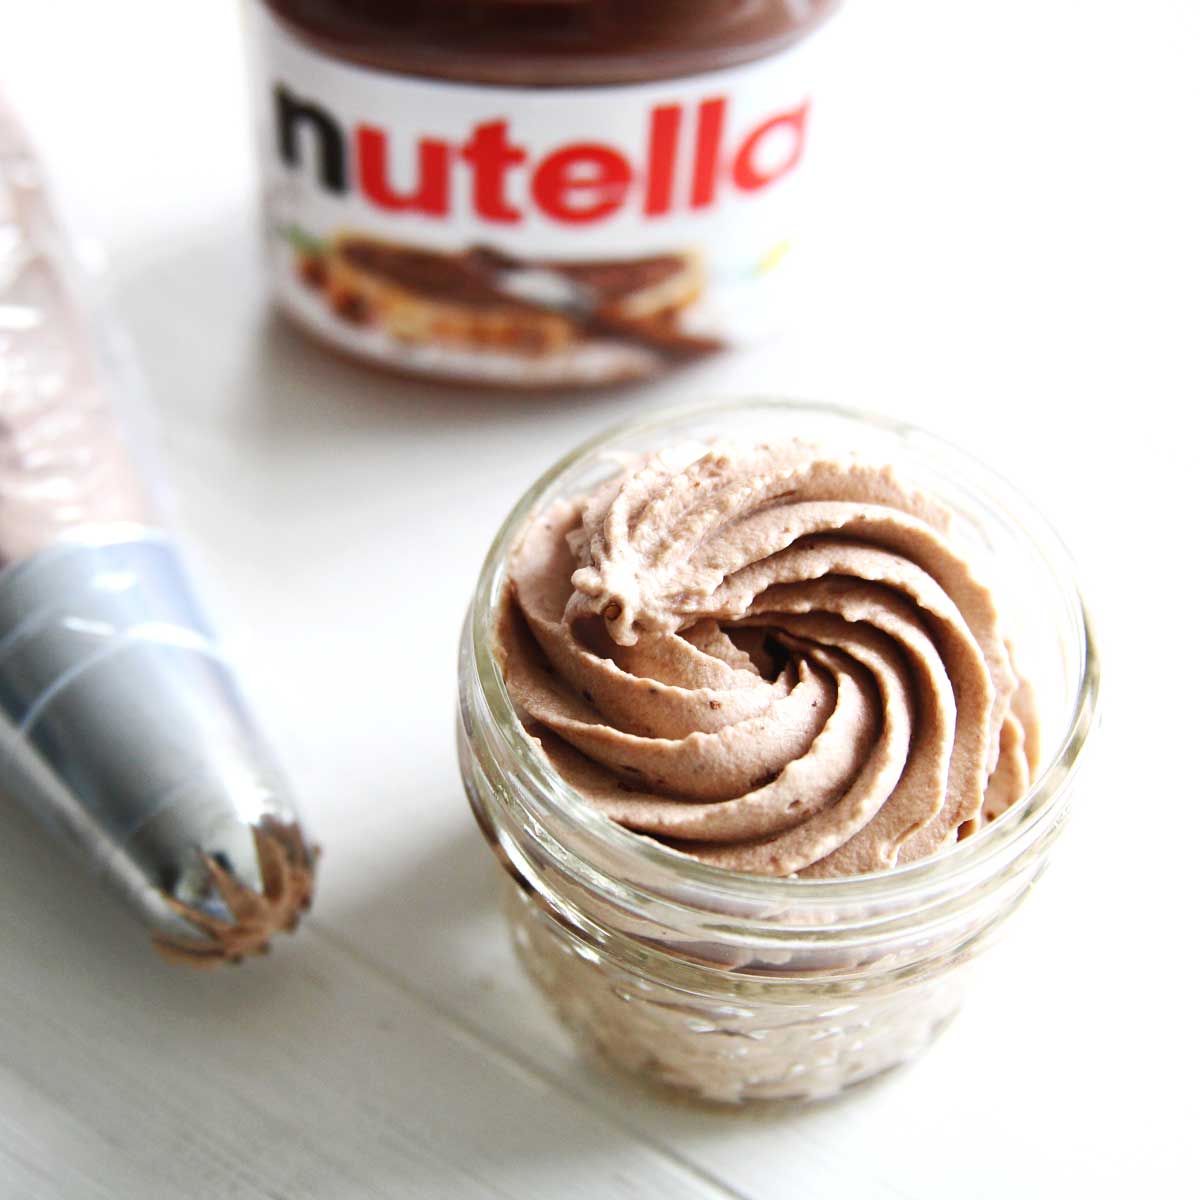 How to Make Nutella Chocolate Whipped Cream (Chantilly Cream) - Strawberry Japanese Roll Cake